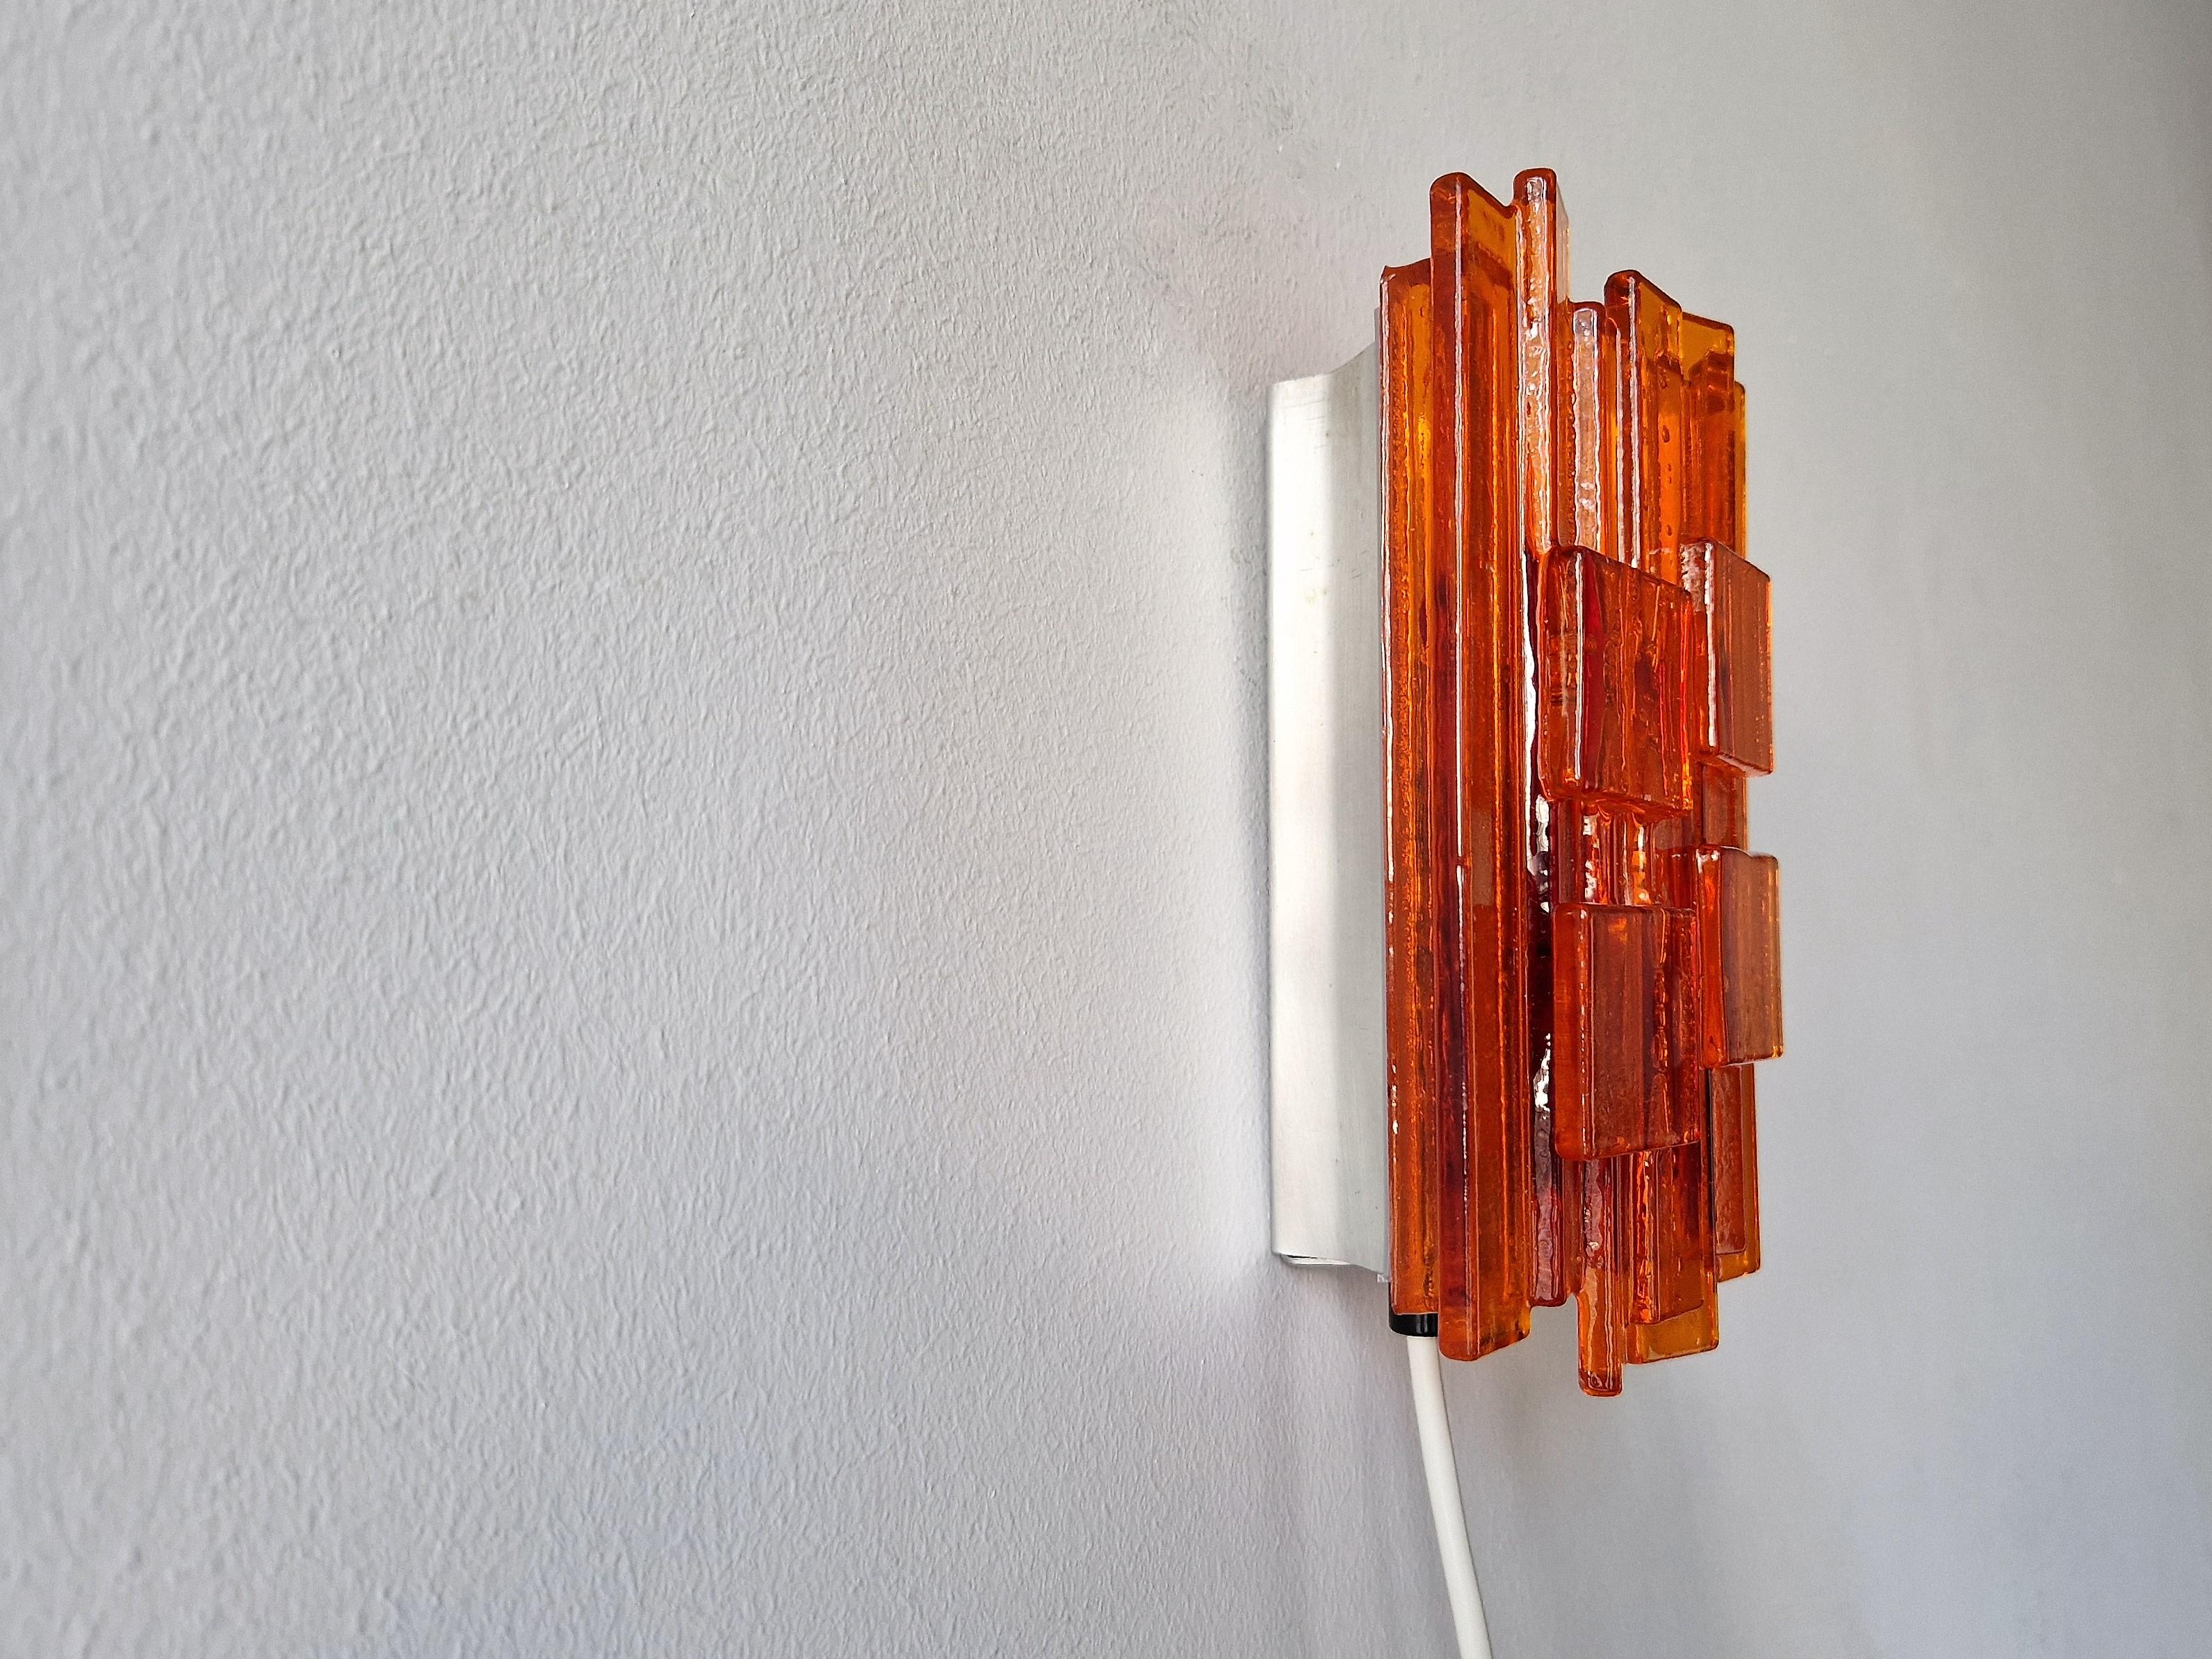 Mid-Century Modern Orange Acrylic and Metal Wall Lamp by Claus Bolby for Cebo Industri, Denmark For Sale